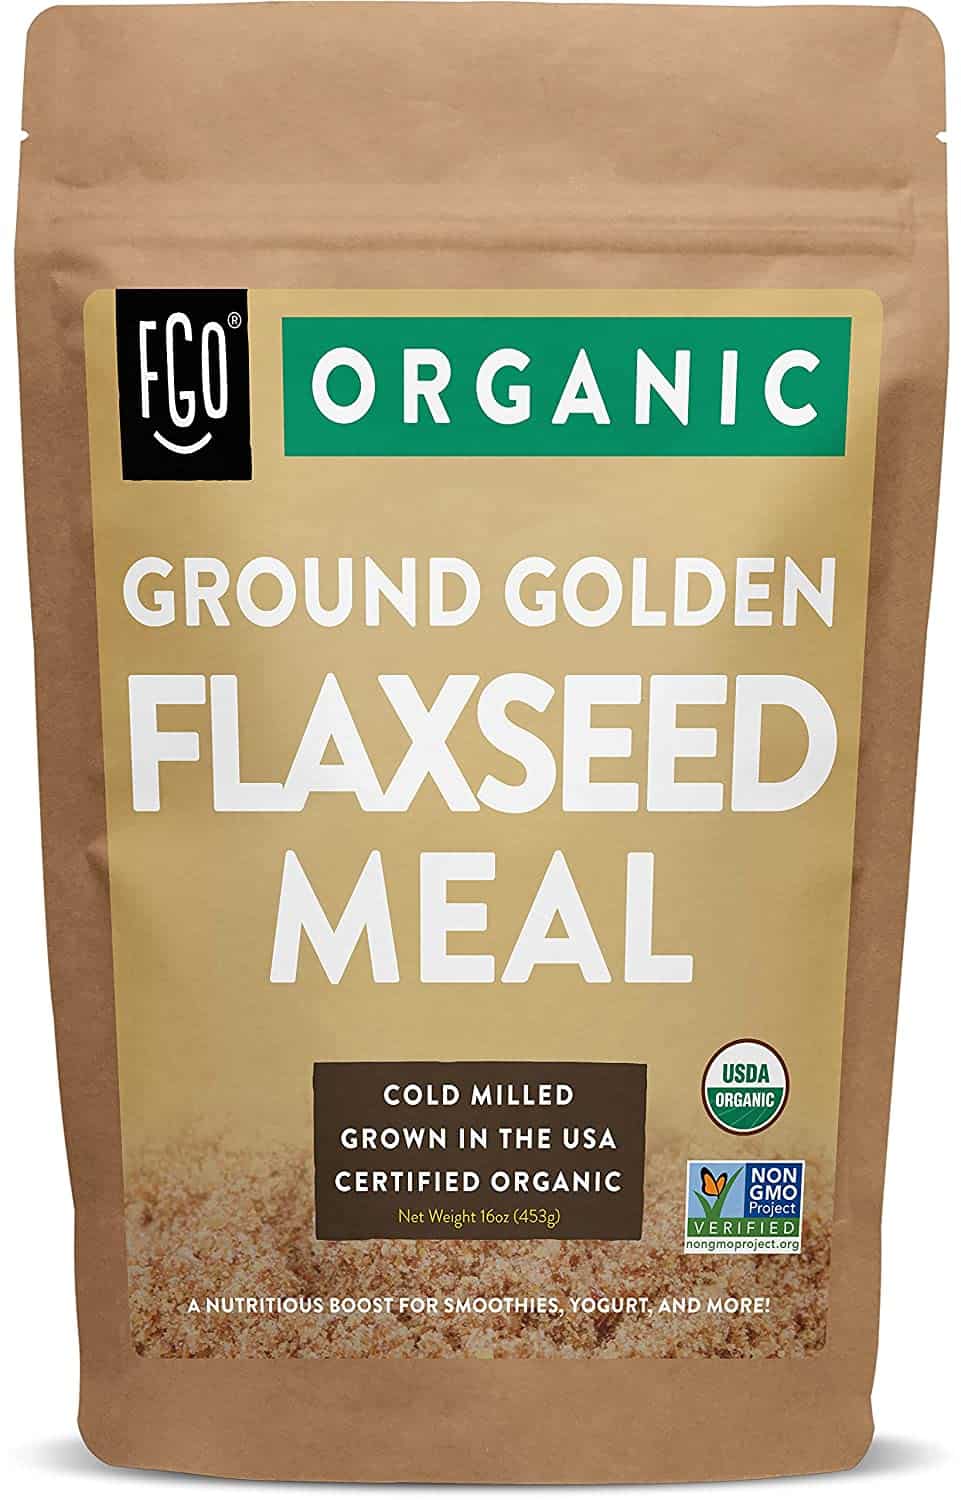 Good substitute for coconut flour is flax seed meal